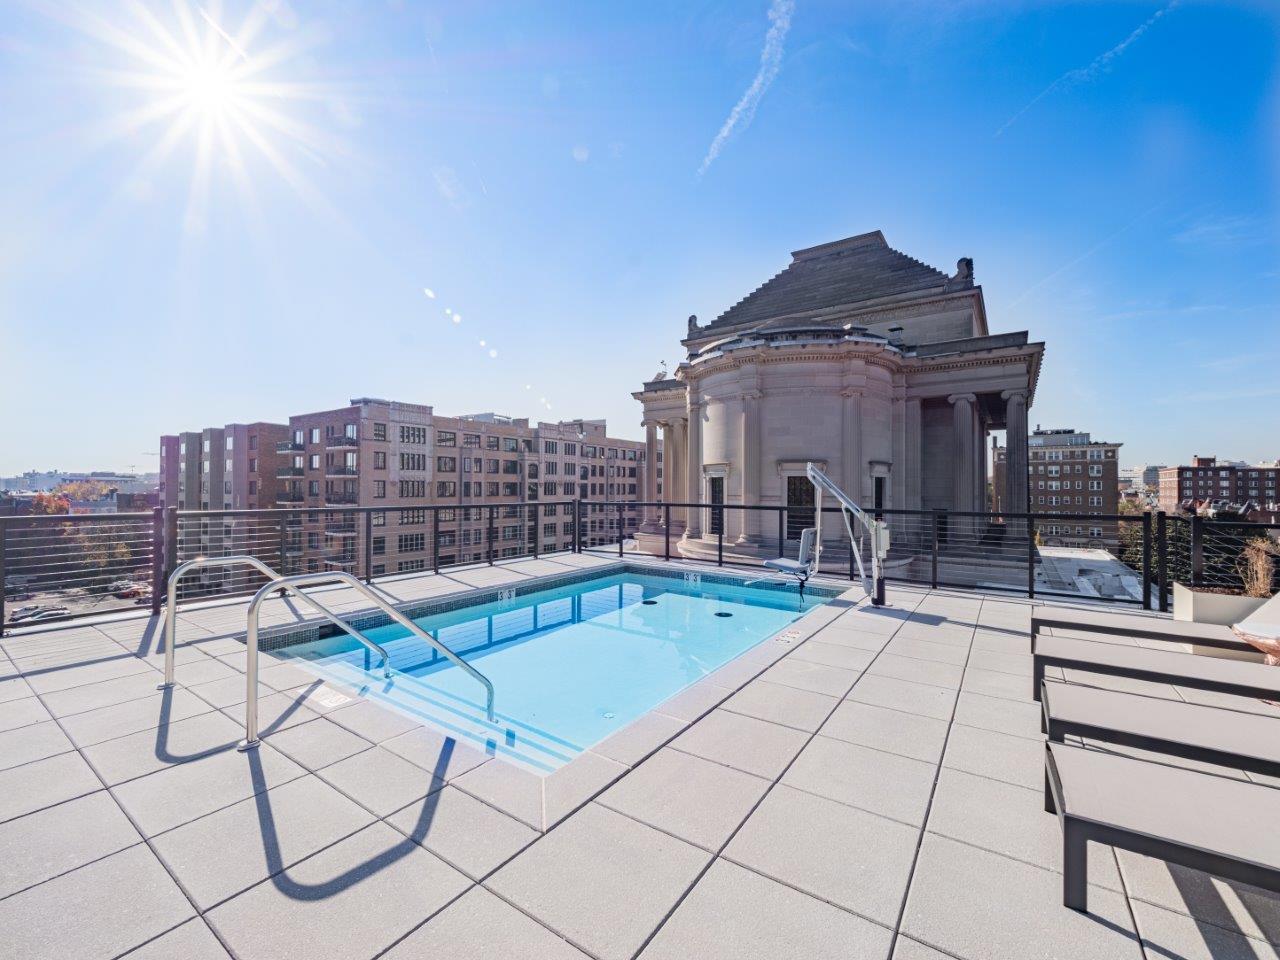 Capitol Rose Luxury Apartments in Washington, DC Rooftop Patio and Pool with Views